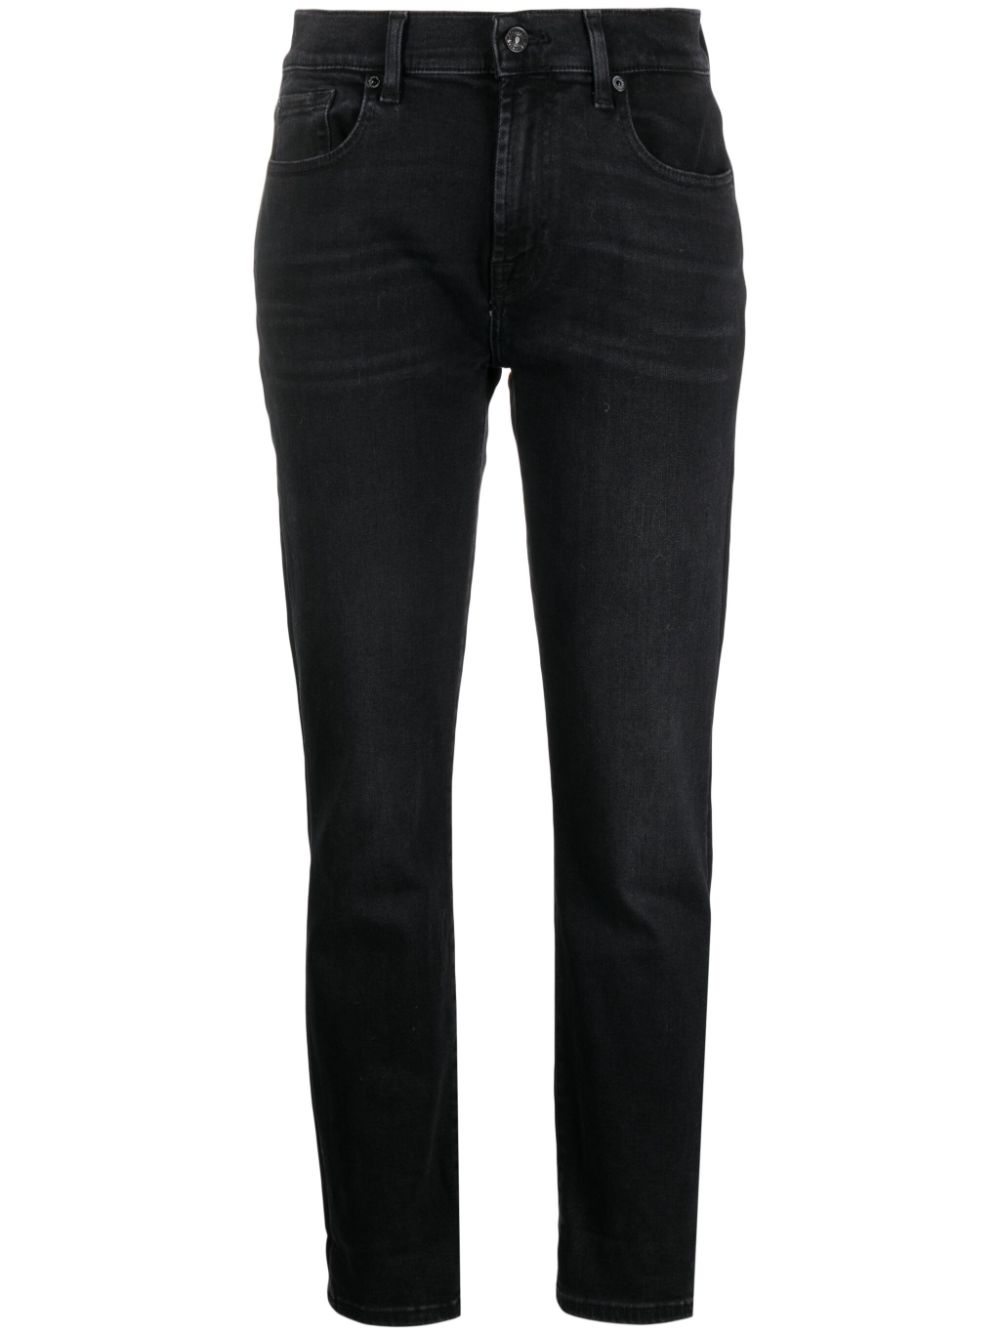 7 For All Mankind 7 FOR ALL MANKIND- Cropped Skinny Denim Jeans